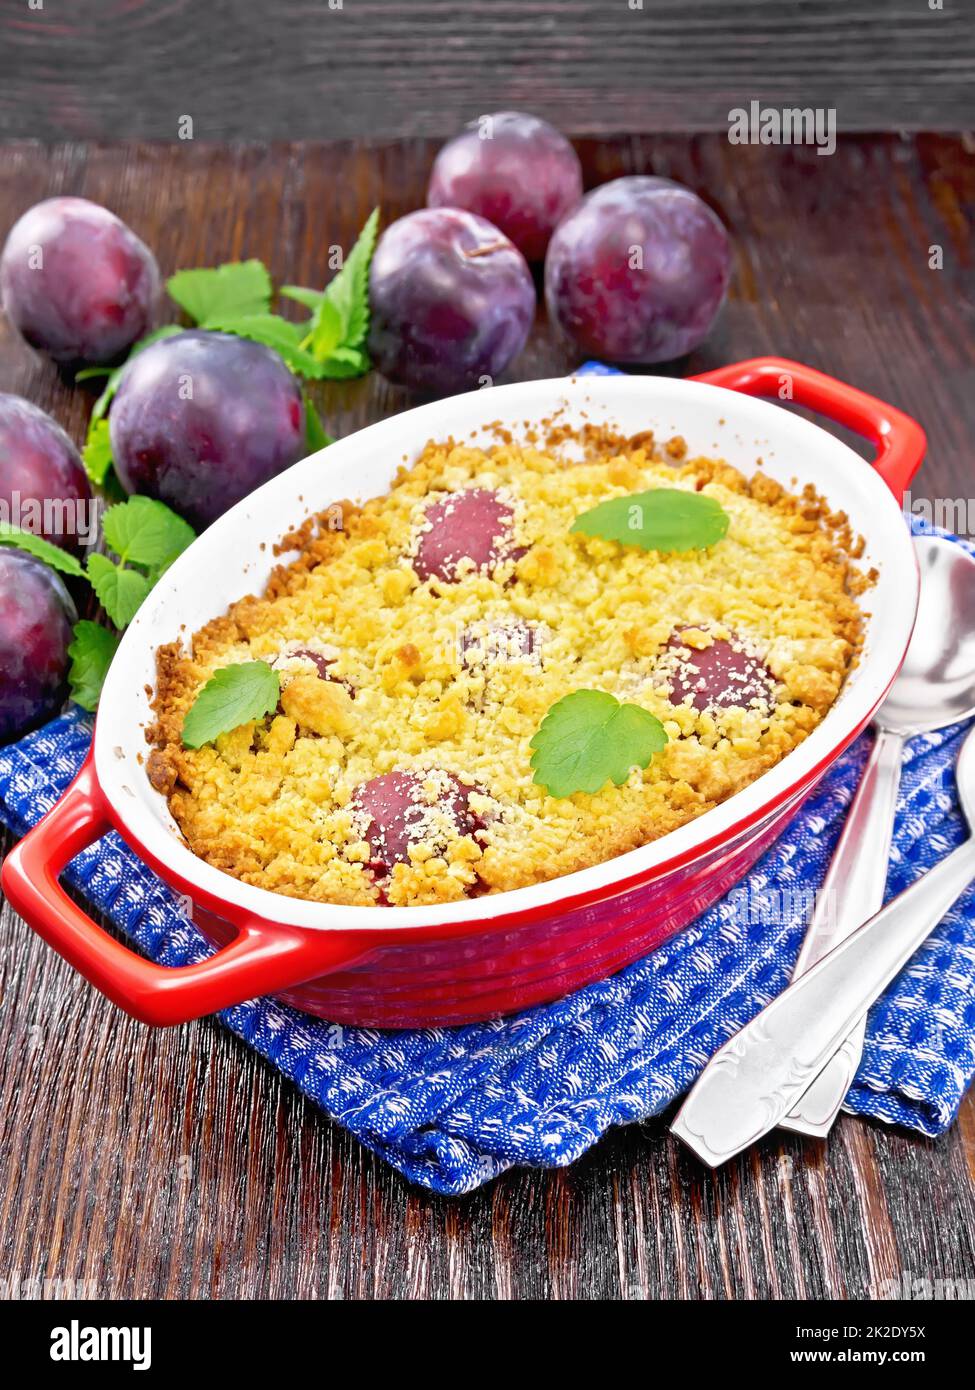 Crumble with plum in brazier on wooden board Stock Photo